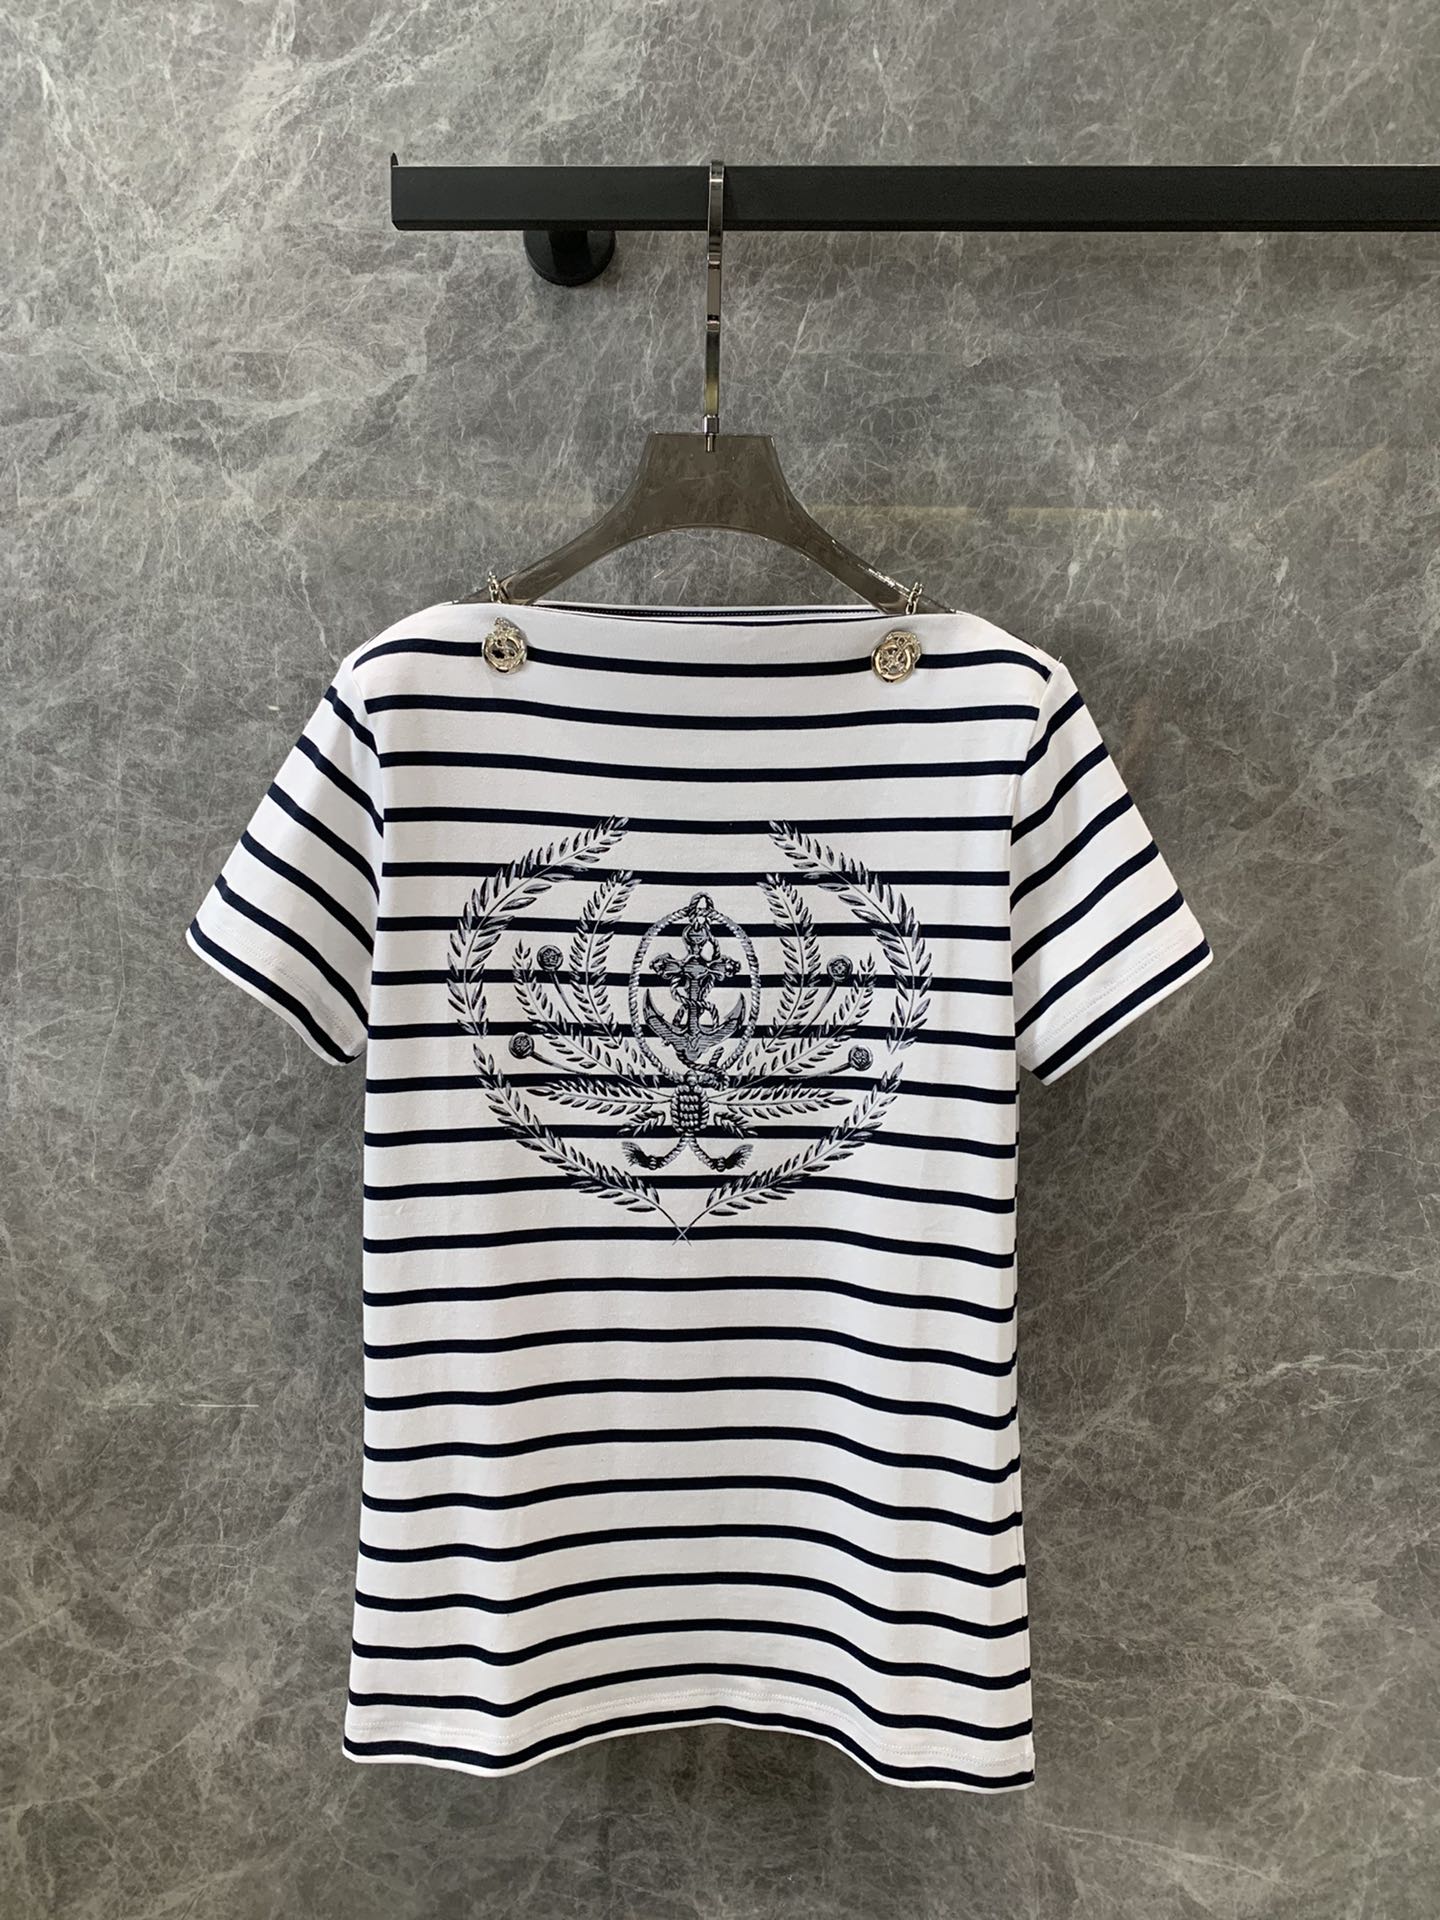 Louis Vuitton Clothing T-Shirt Printing Cotton Knitting Spring/Summer Collection Short Sleeve